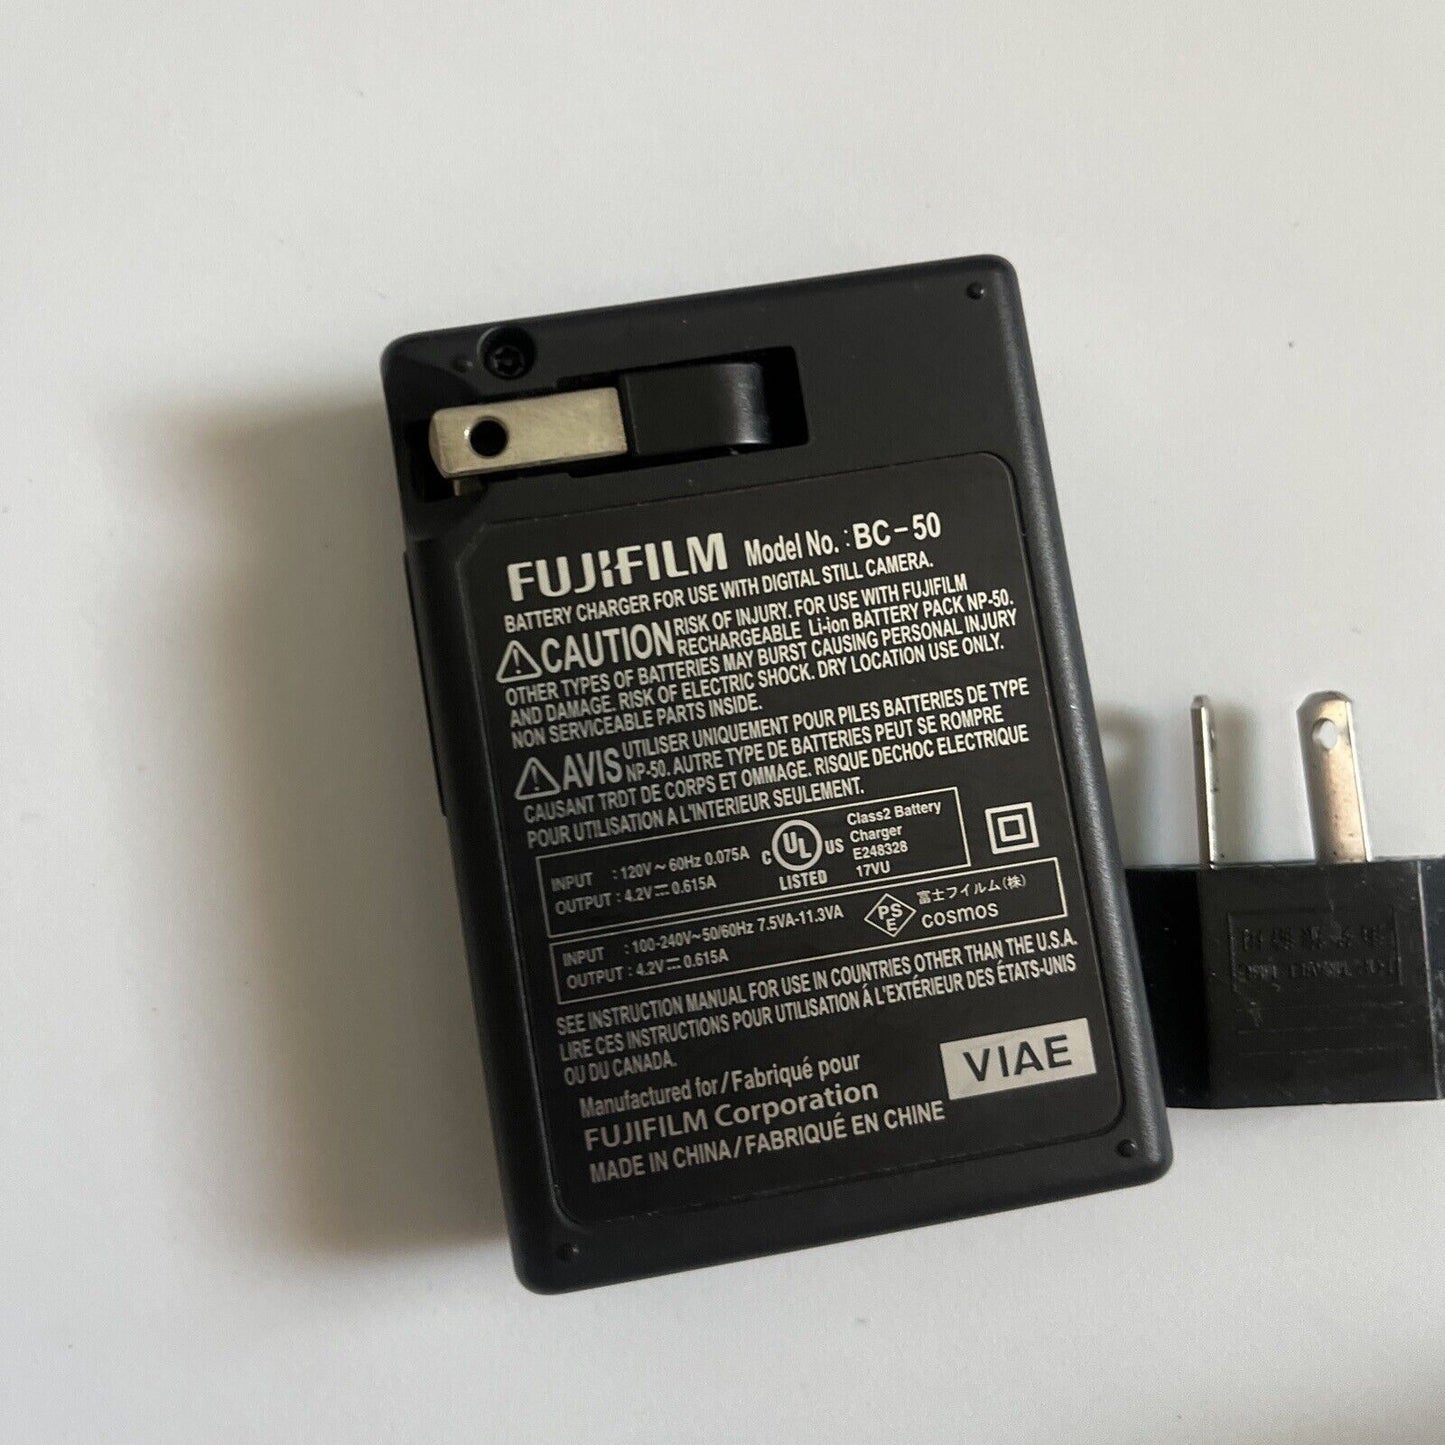 Genuine Fujifilm BC-50 Battery Charger